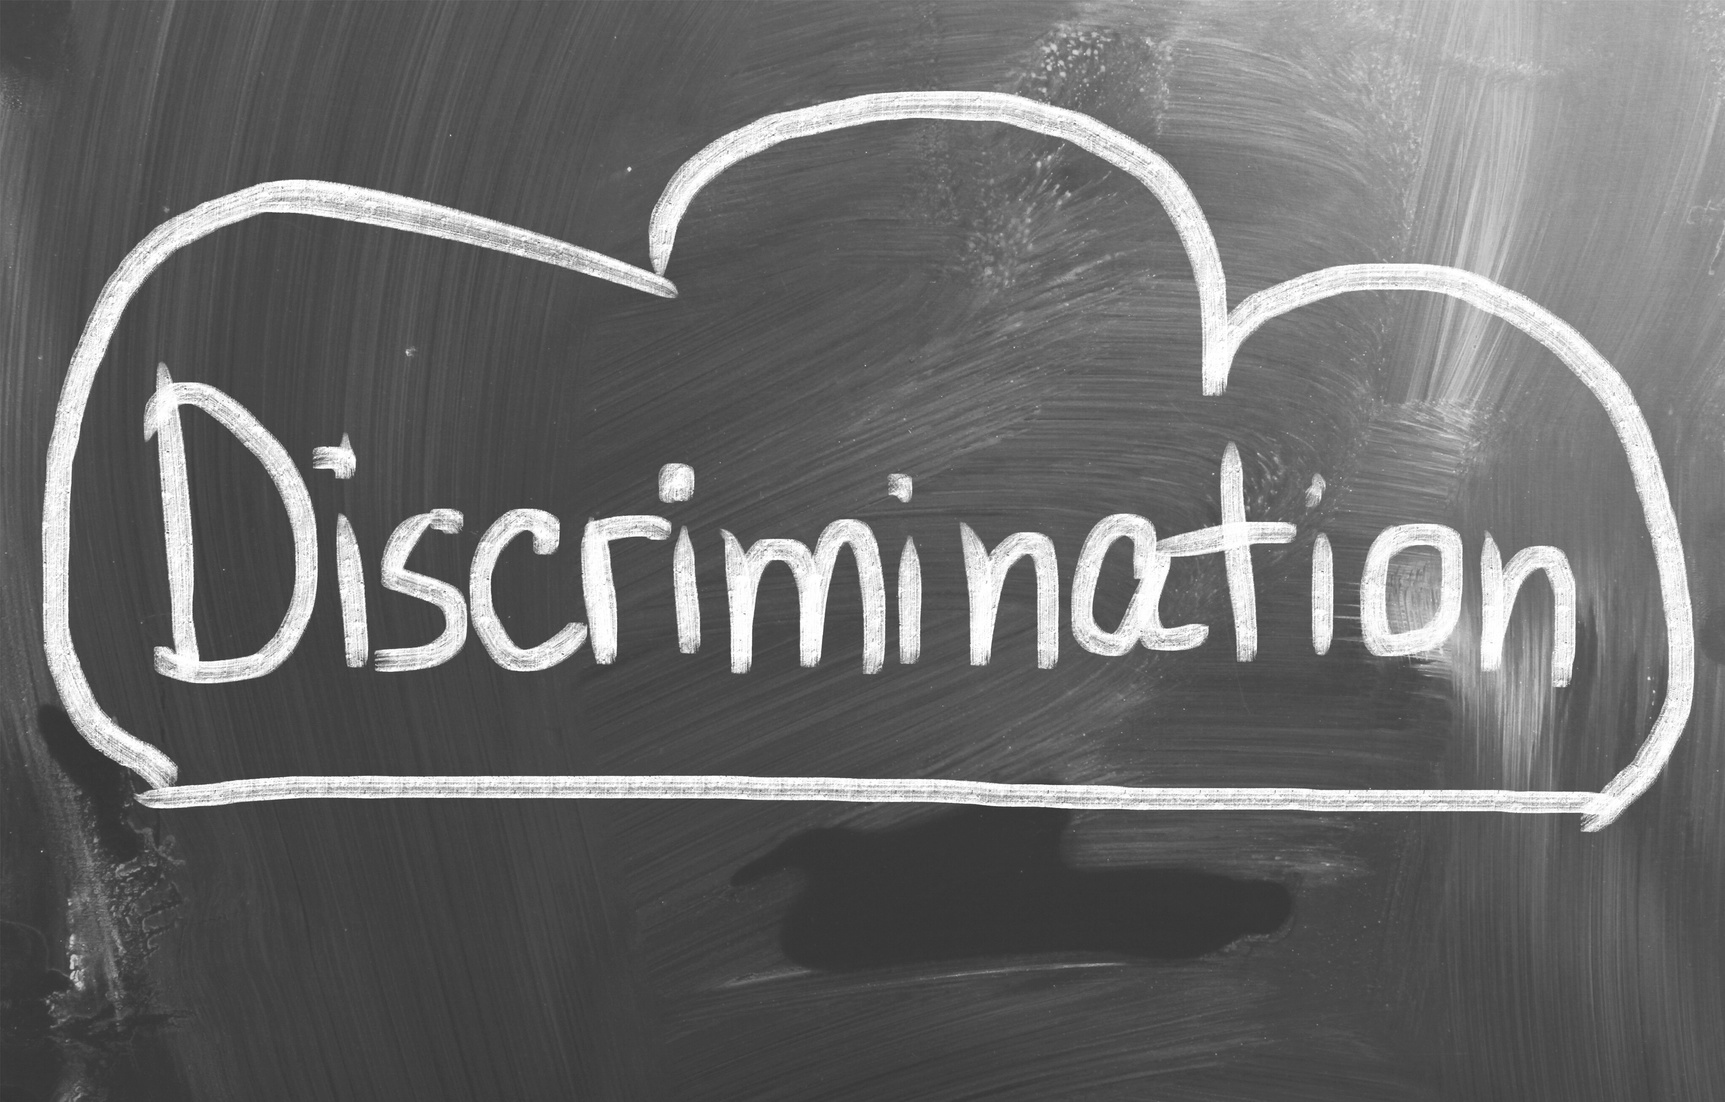 Ohio Court Rules in Favor of Employer in Discrimination Case